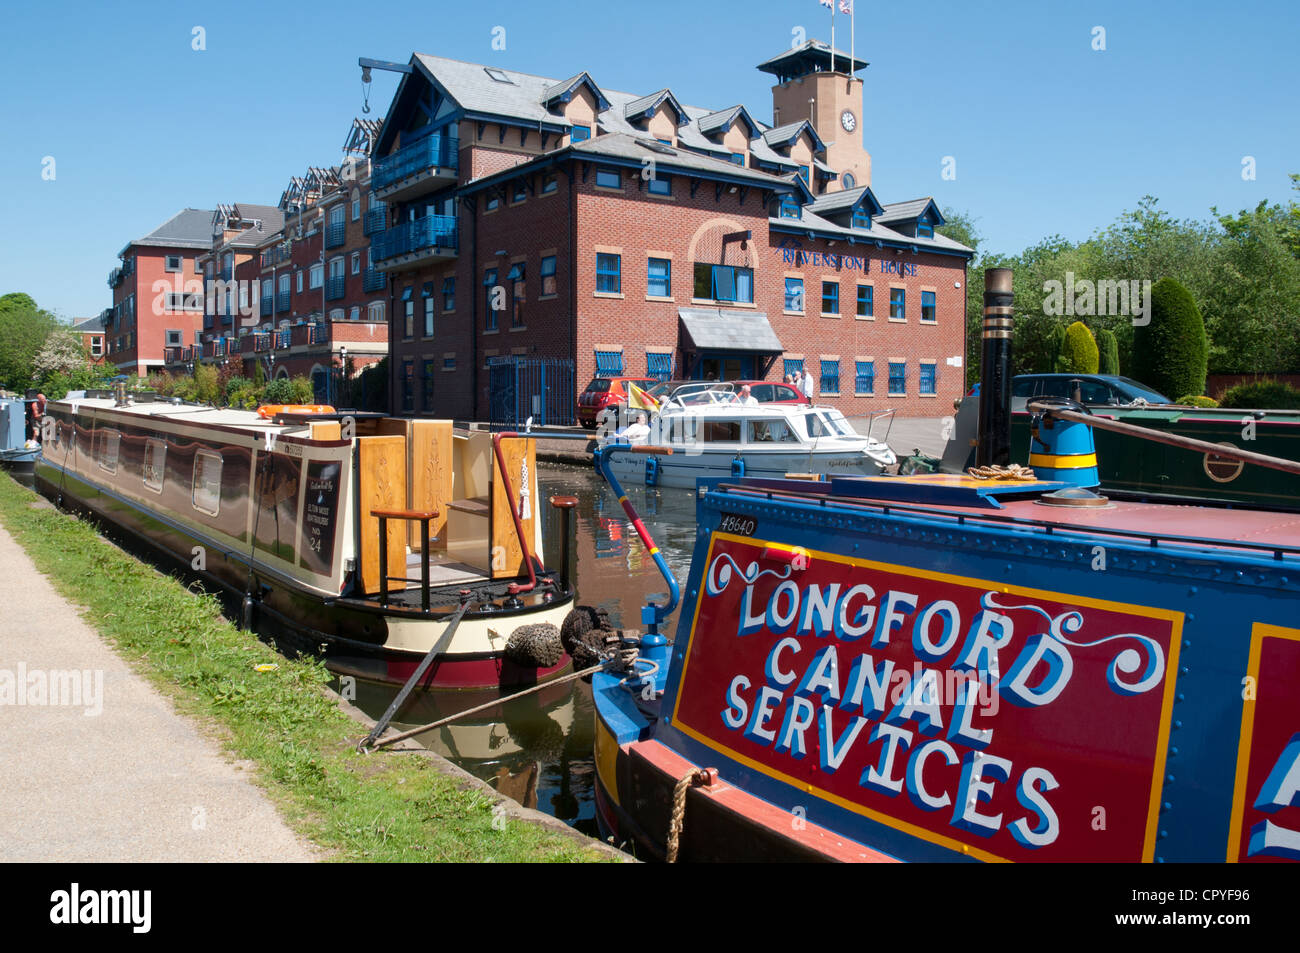 Narrowboats and apartments on the Bridgewater Canal at Sale Waterside, Cheshire, England, UK Stock Photo